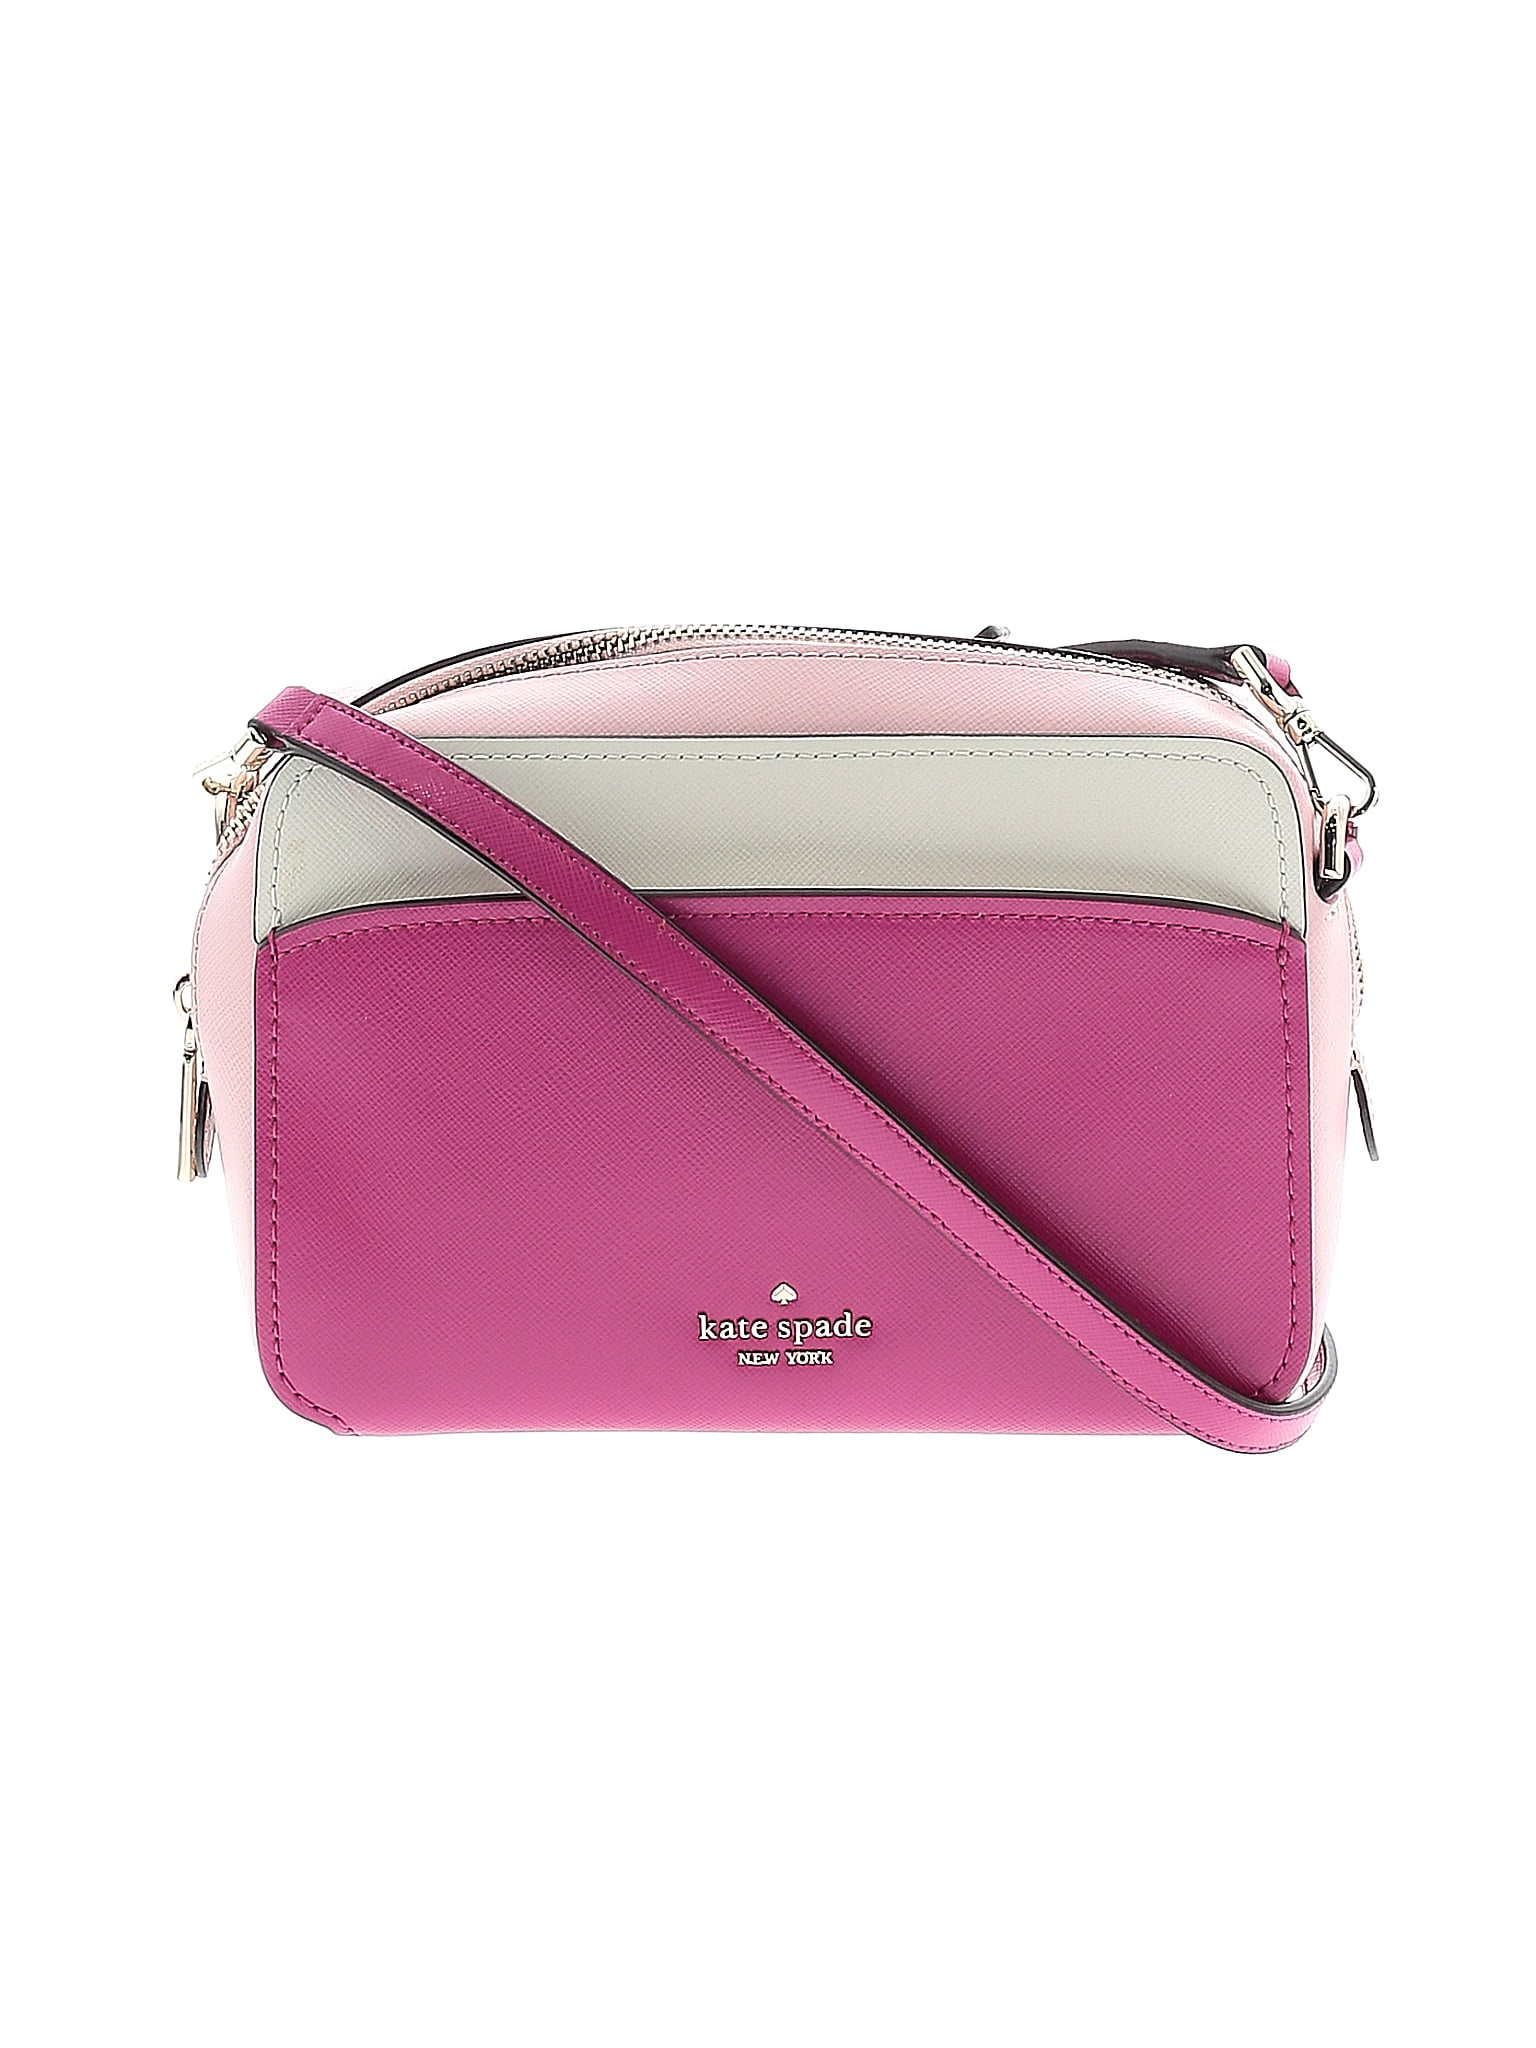 Kate Spade New York Color Block Solid Pink Leather Crossbody Bag One ...